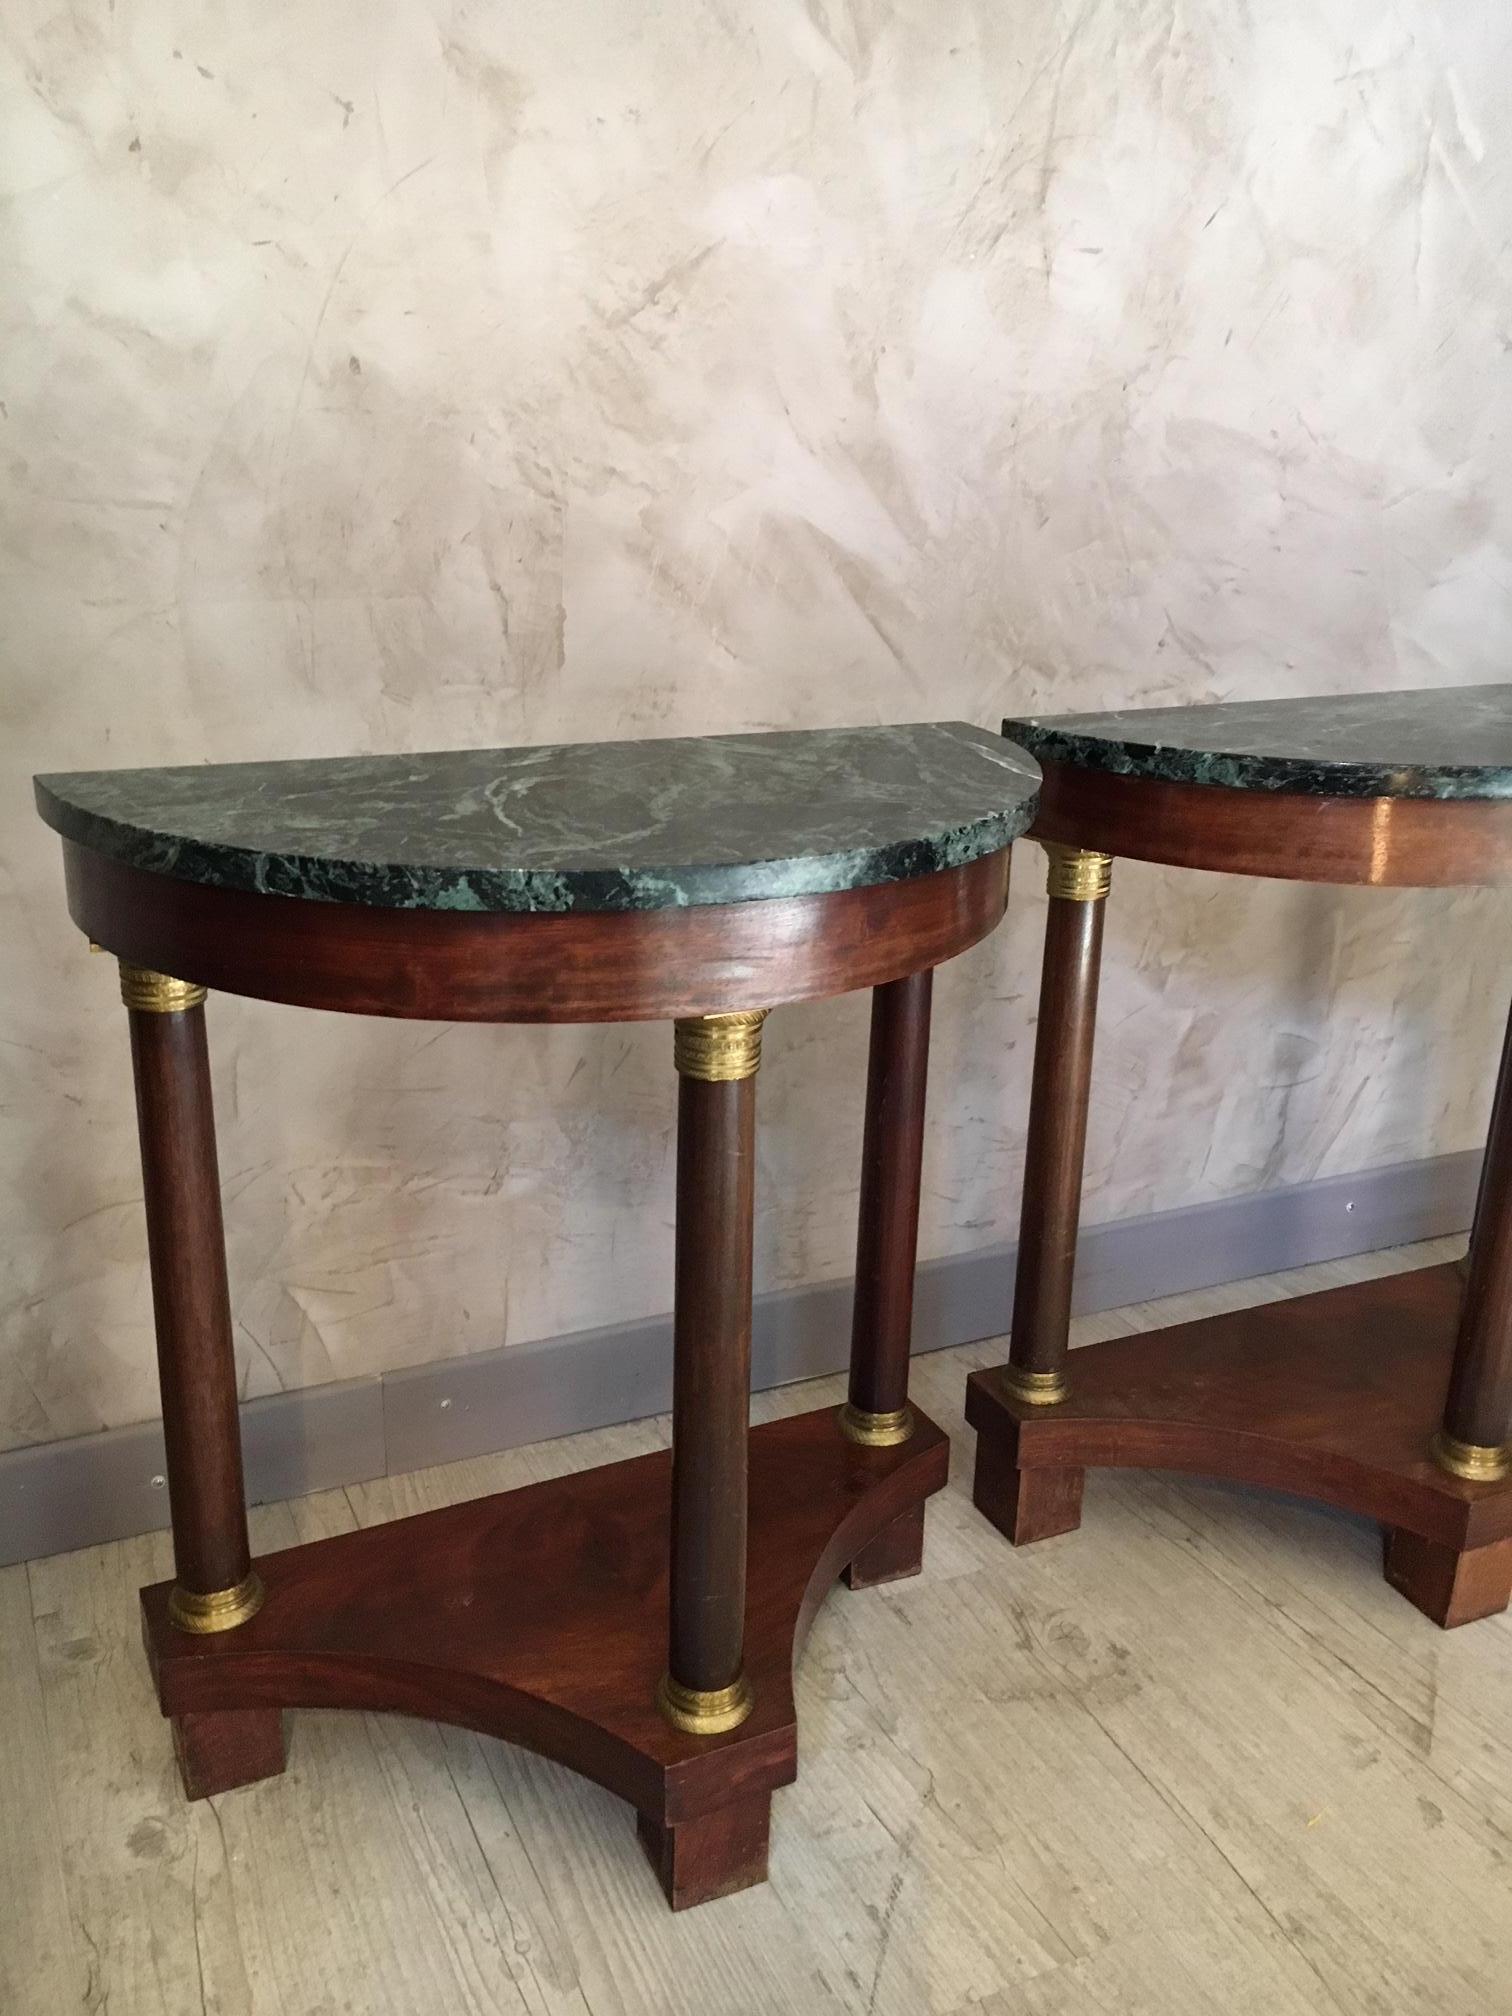 Very nice pair of mahogany Empire style half moon console table. Mahogany columns with brass ring at the extremities. Green marble top. When the two console table are reunited, it forms a round table.
These antique console tables type are pretty